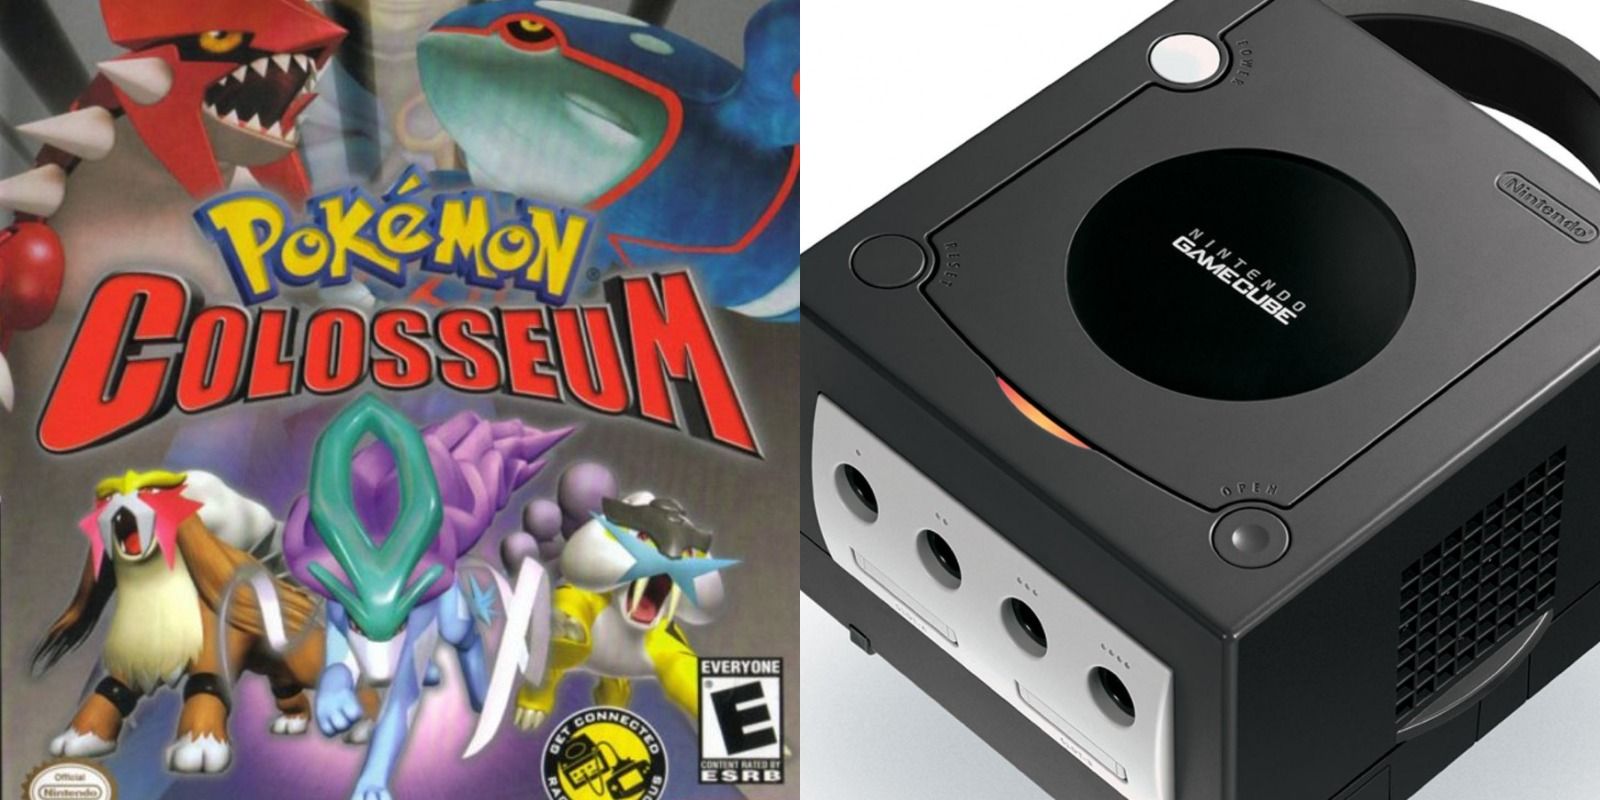 Colosseum box art featuring some Legendary Pokémon and the GameCube